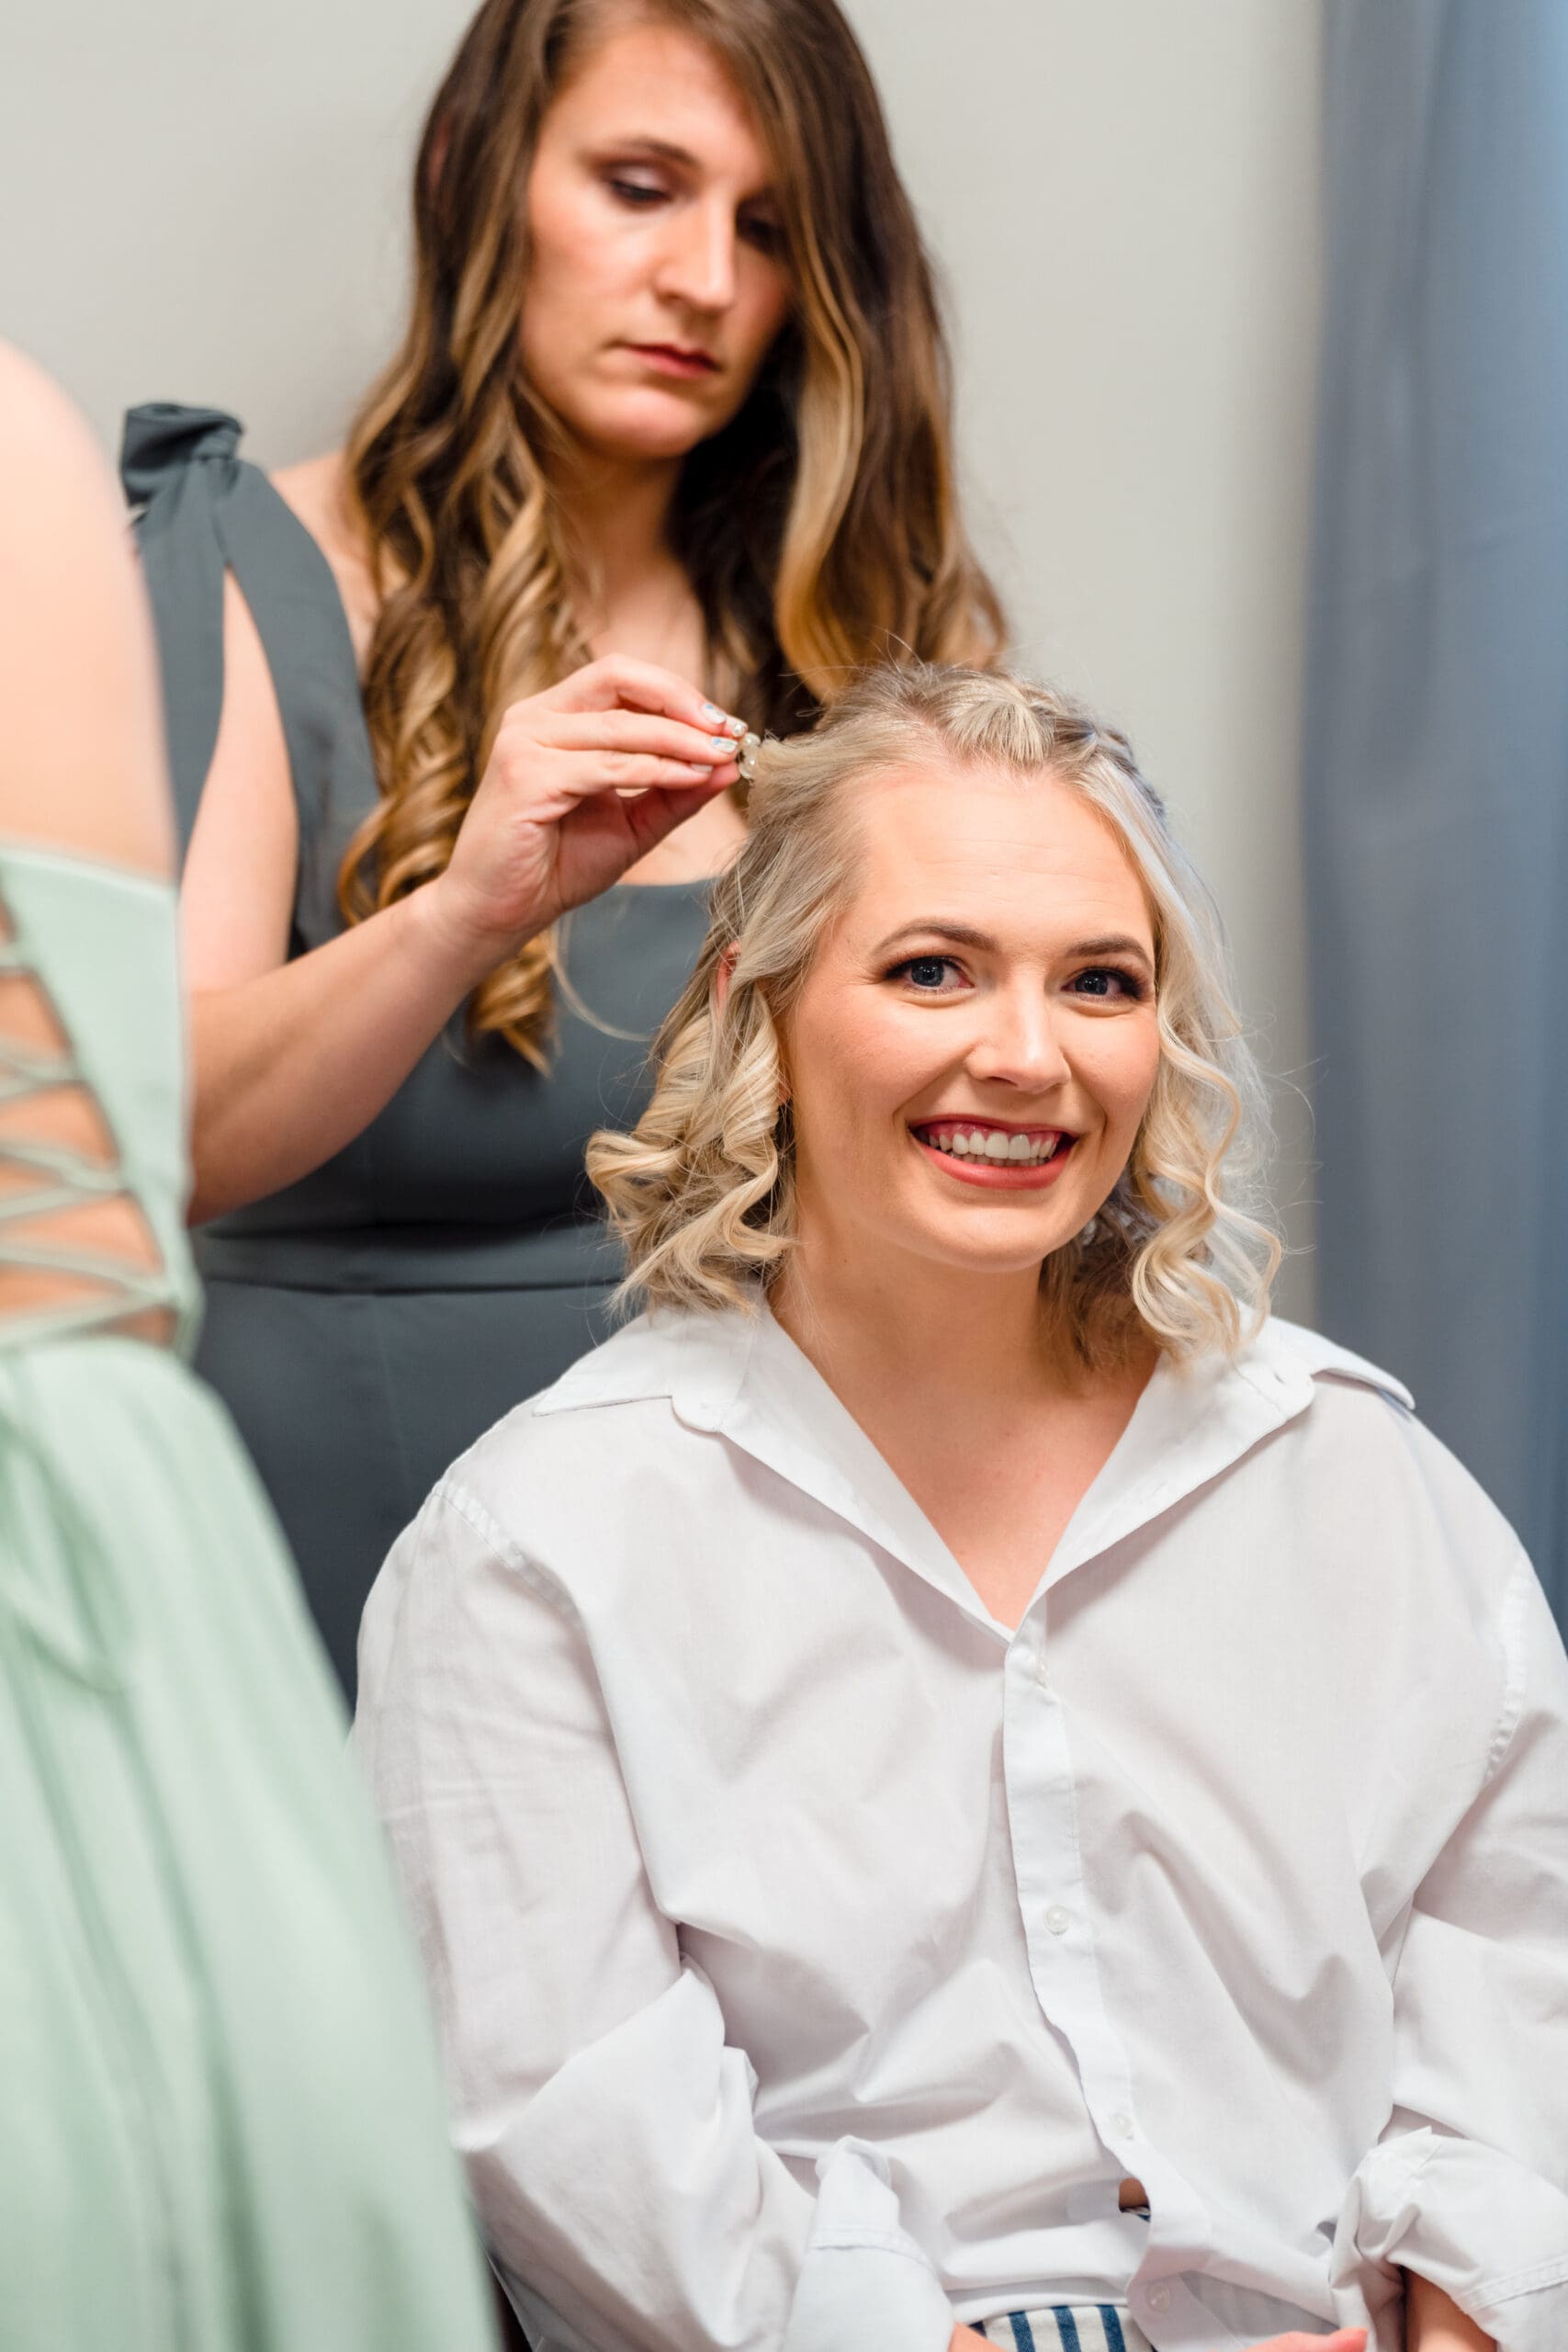 Delisa getting ready with bridesmaid assisting with her hair